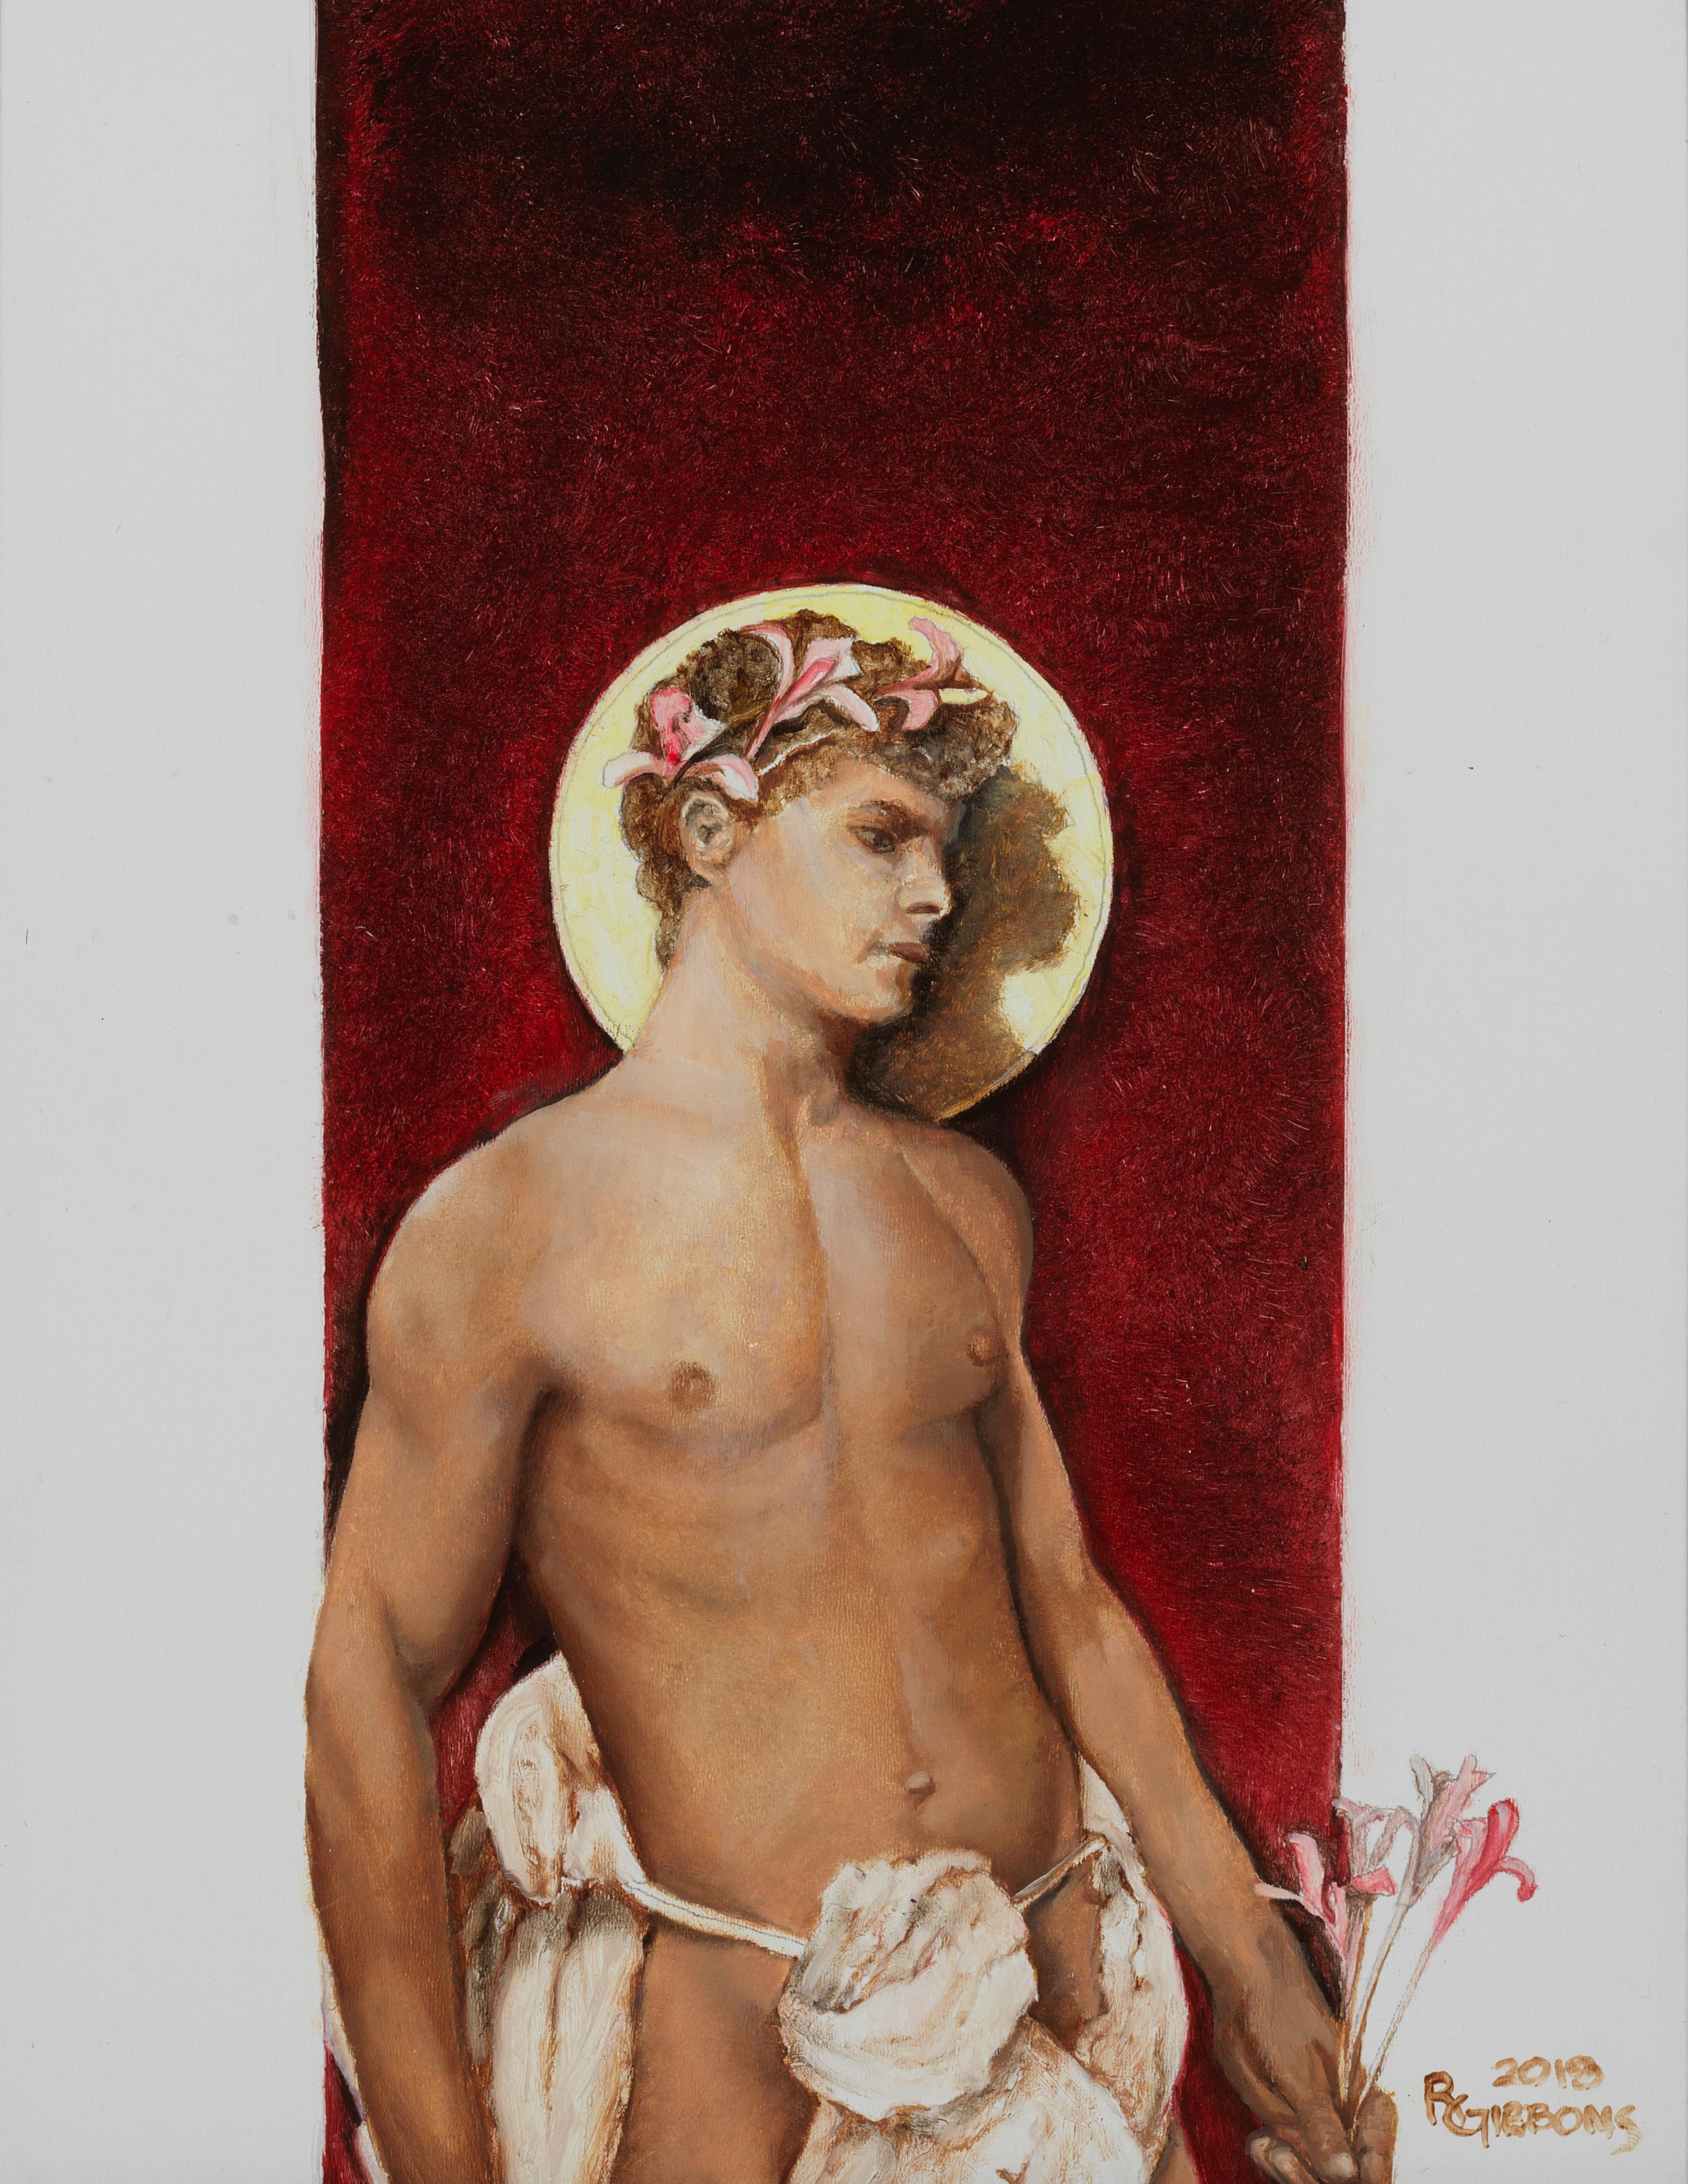 Saint - Young, Semi-Nude Male with Burgundy and White Background, Oil on Panel - Painting by Richard Gibbons